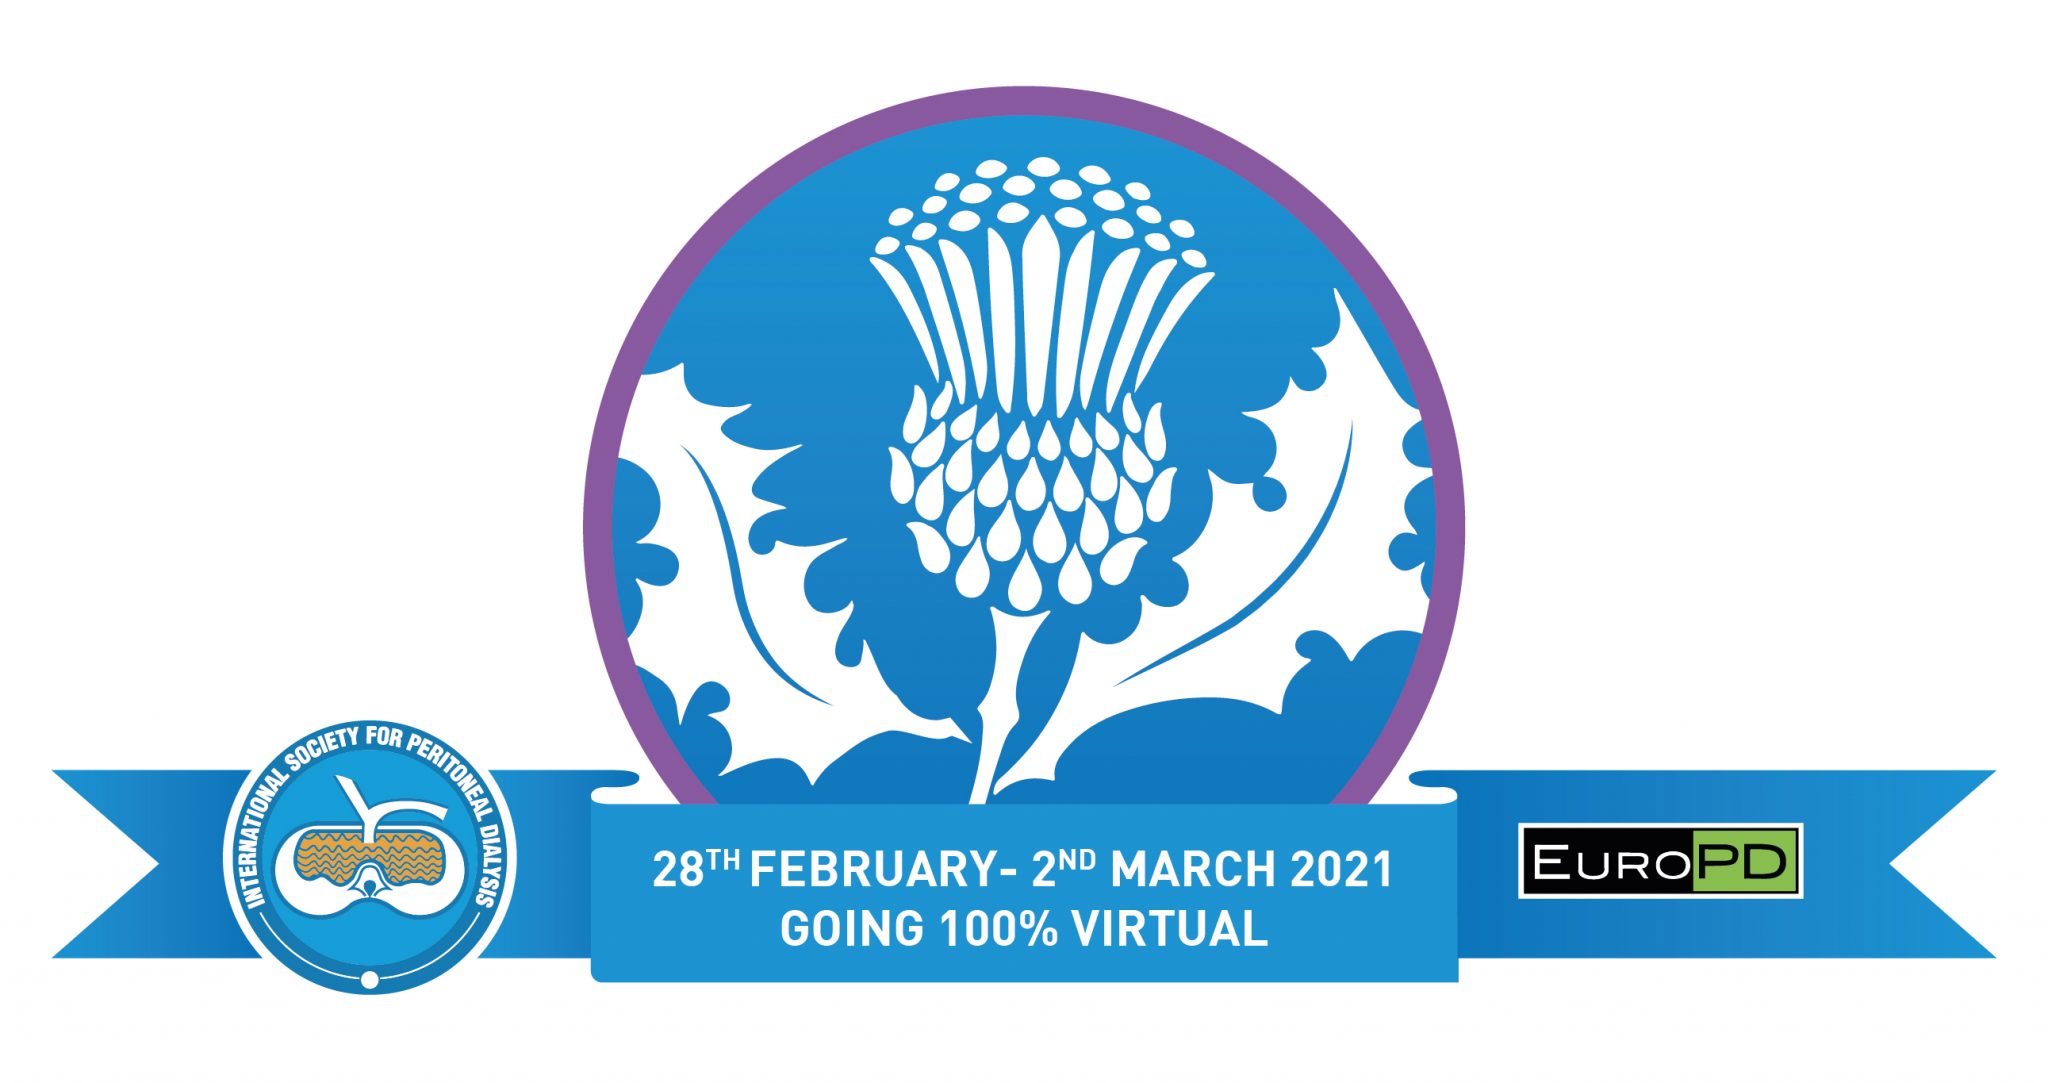 ISPD & EuroPD 2021 VIRTUAL - Joint Congress of The International Society of Peritoneal Dialysis and European Peritoneal Dialysis / Virtual